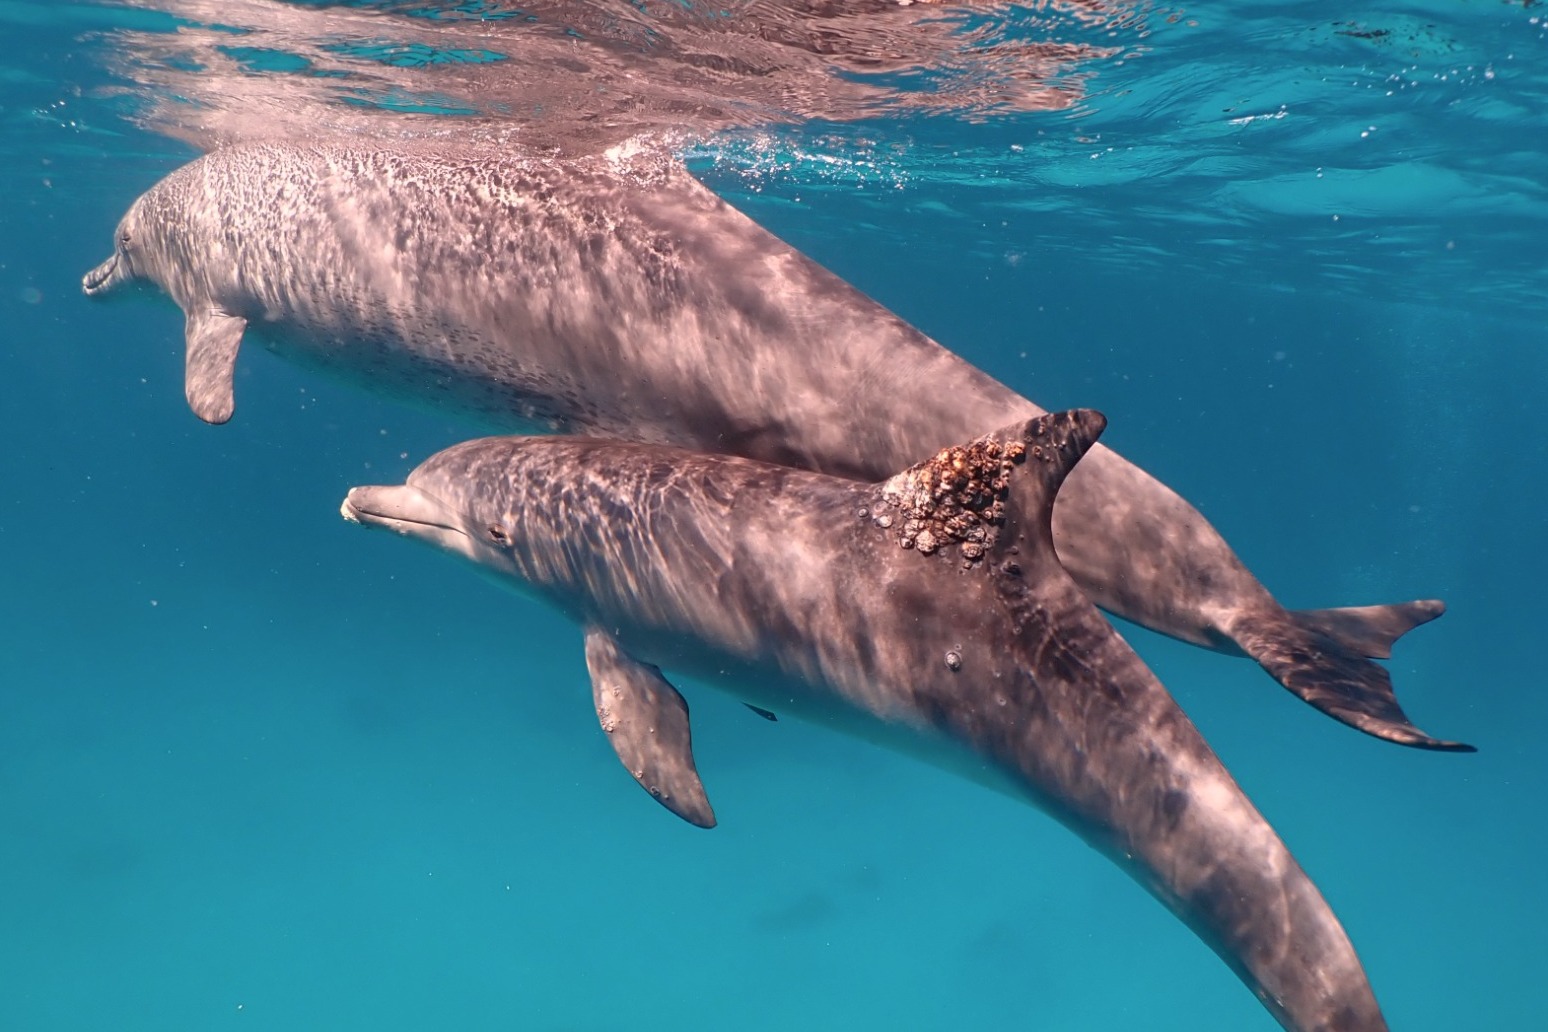 Dolphins line up to self-medicate skin conditions with coral, research suggests 